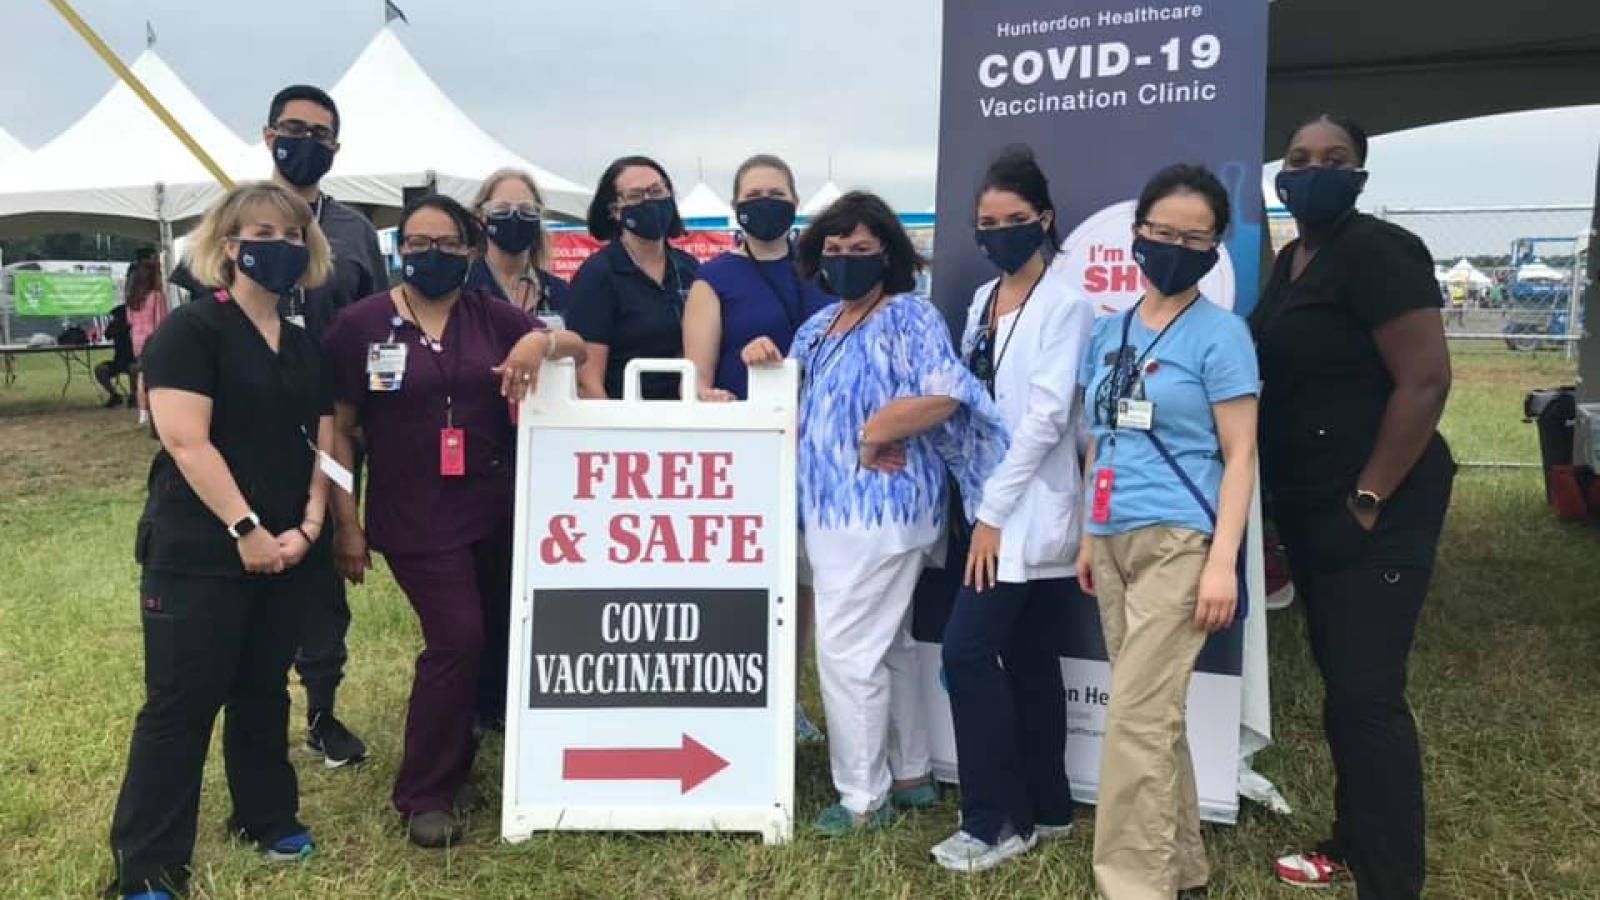 Employees gather for a picture at a COVID-19 Vaccine Clinic.